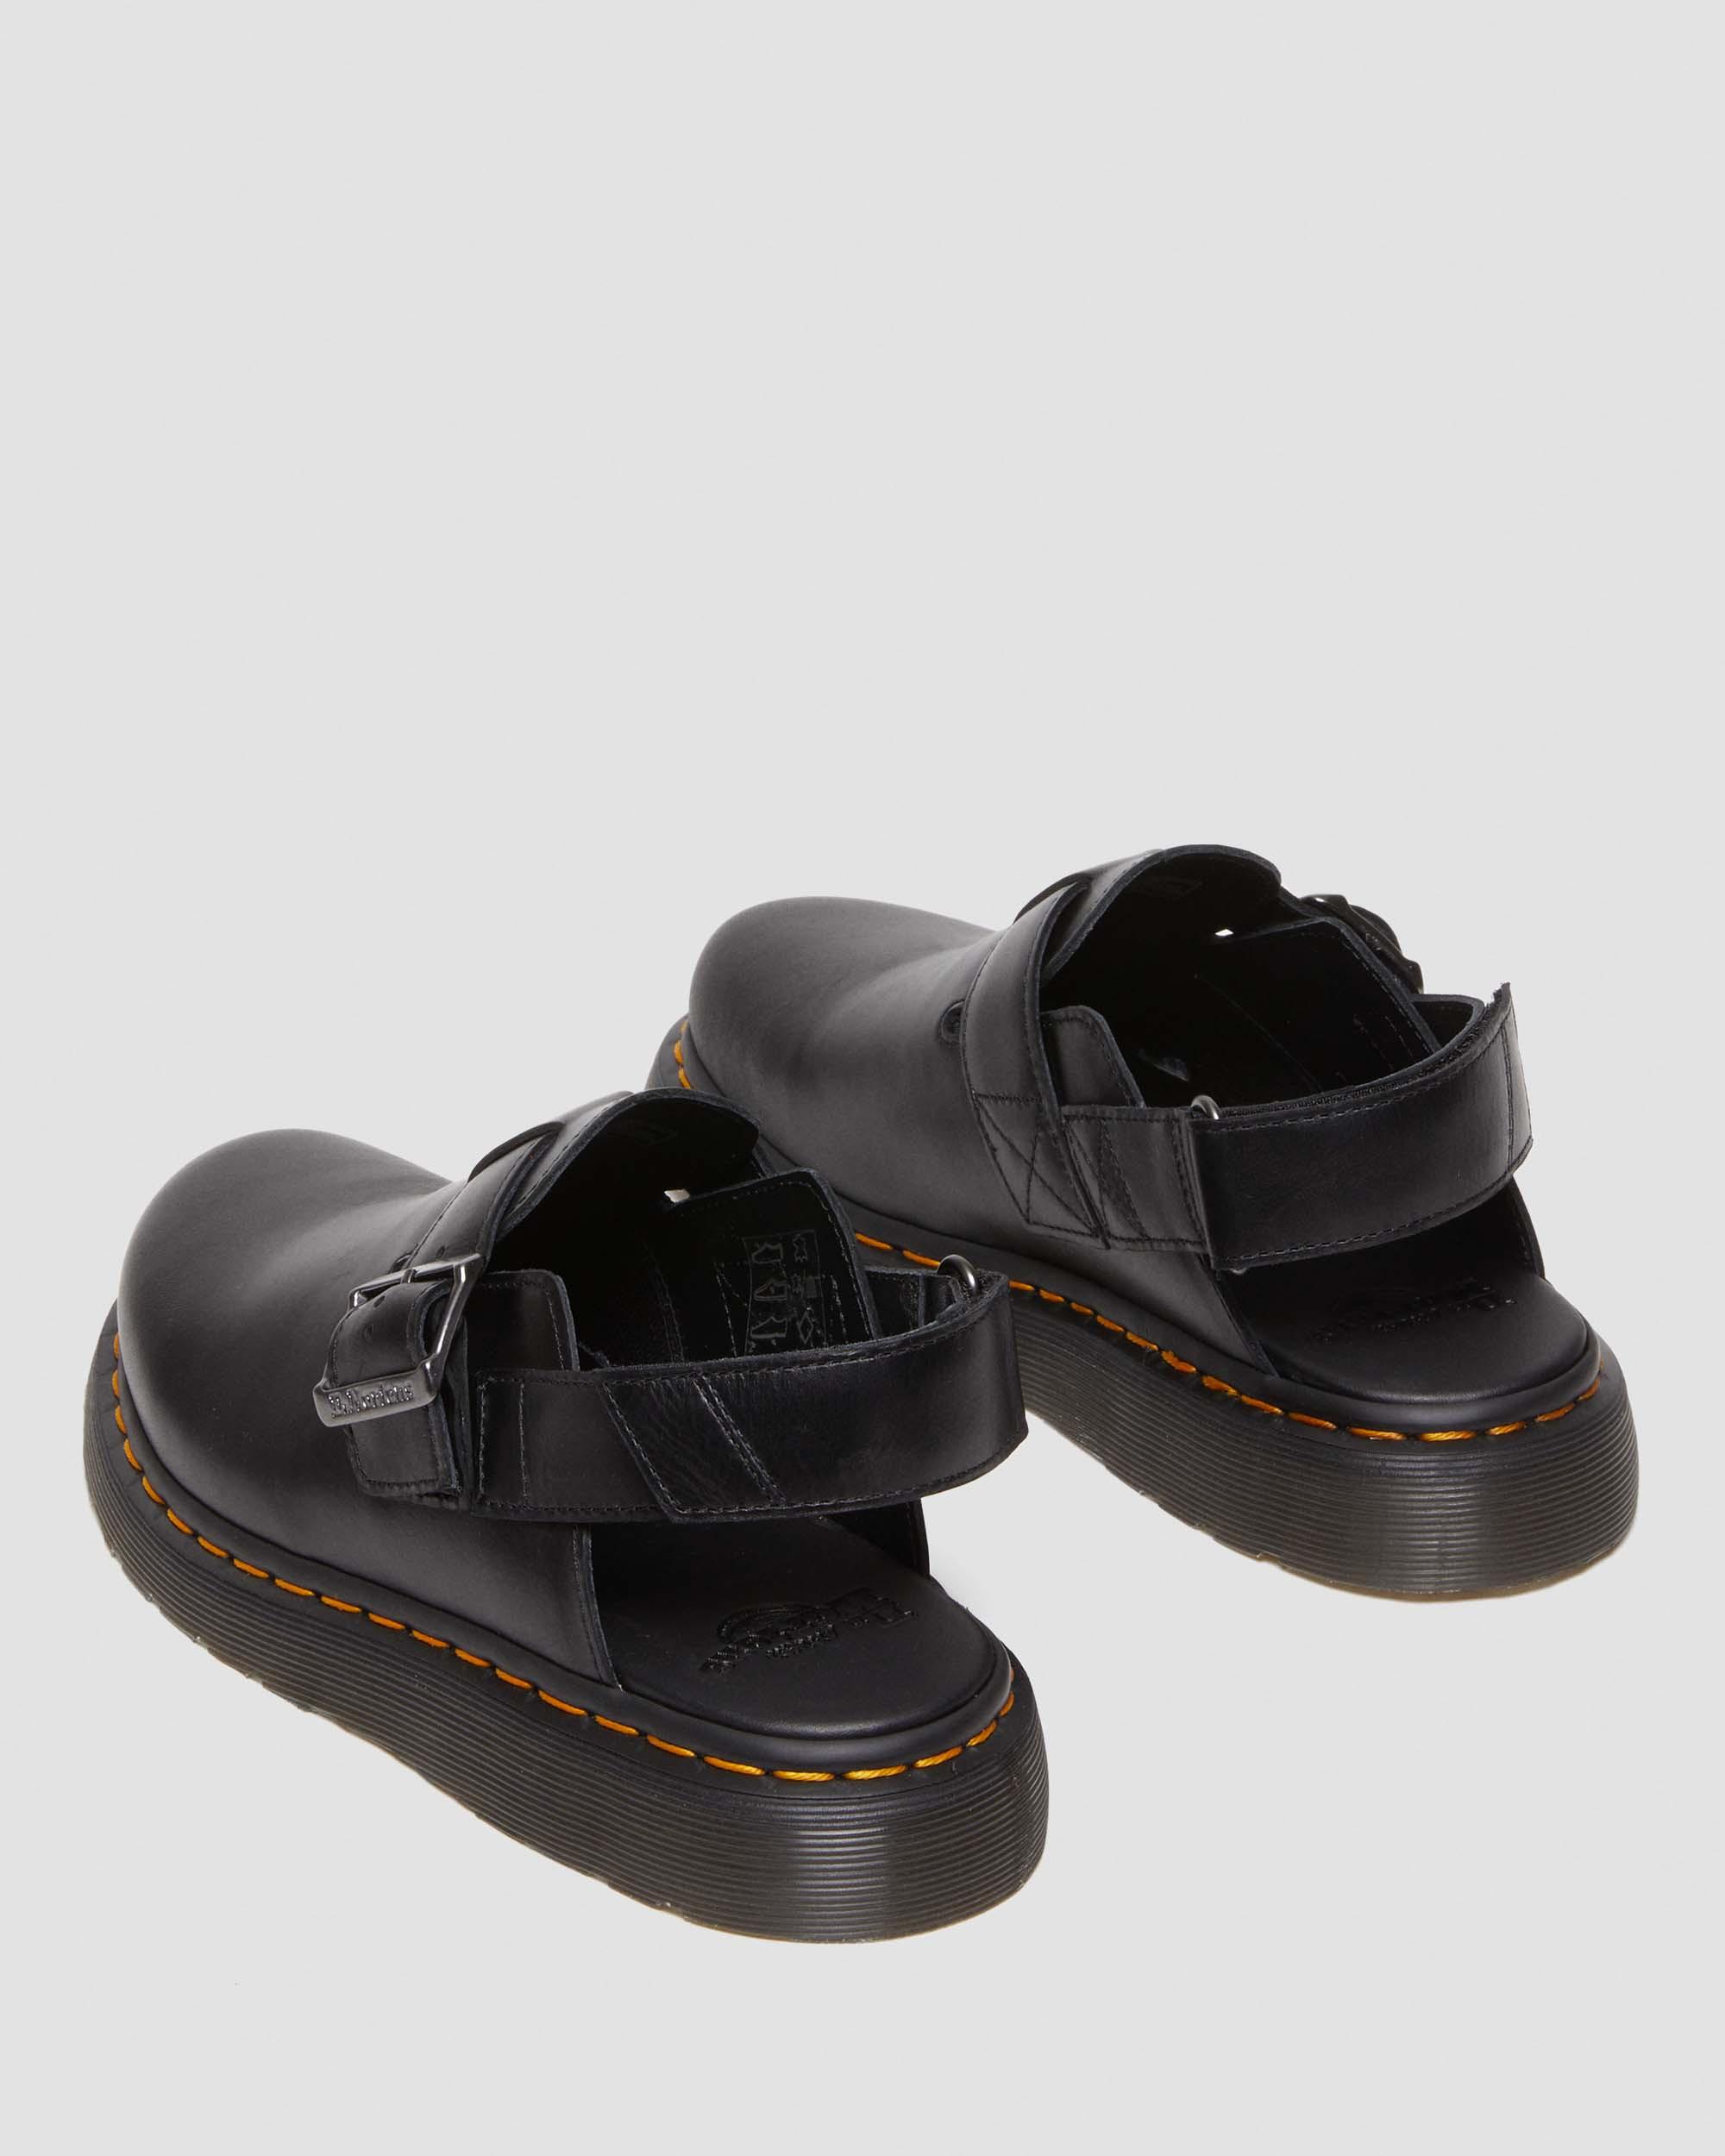 Leather sandal Mulberry Black size 38 EU in Leather - 23838100